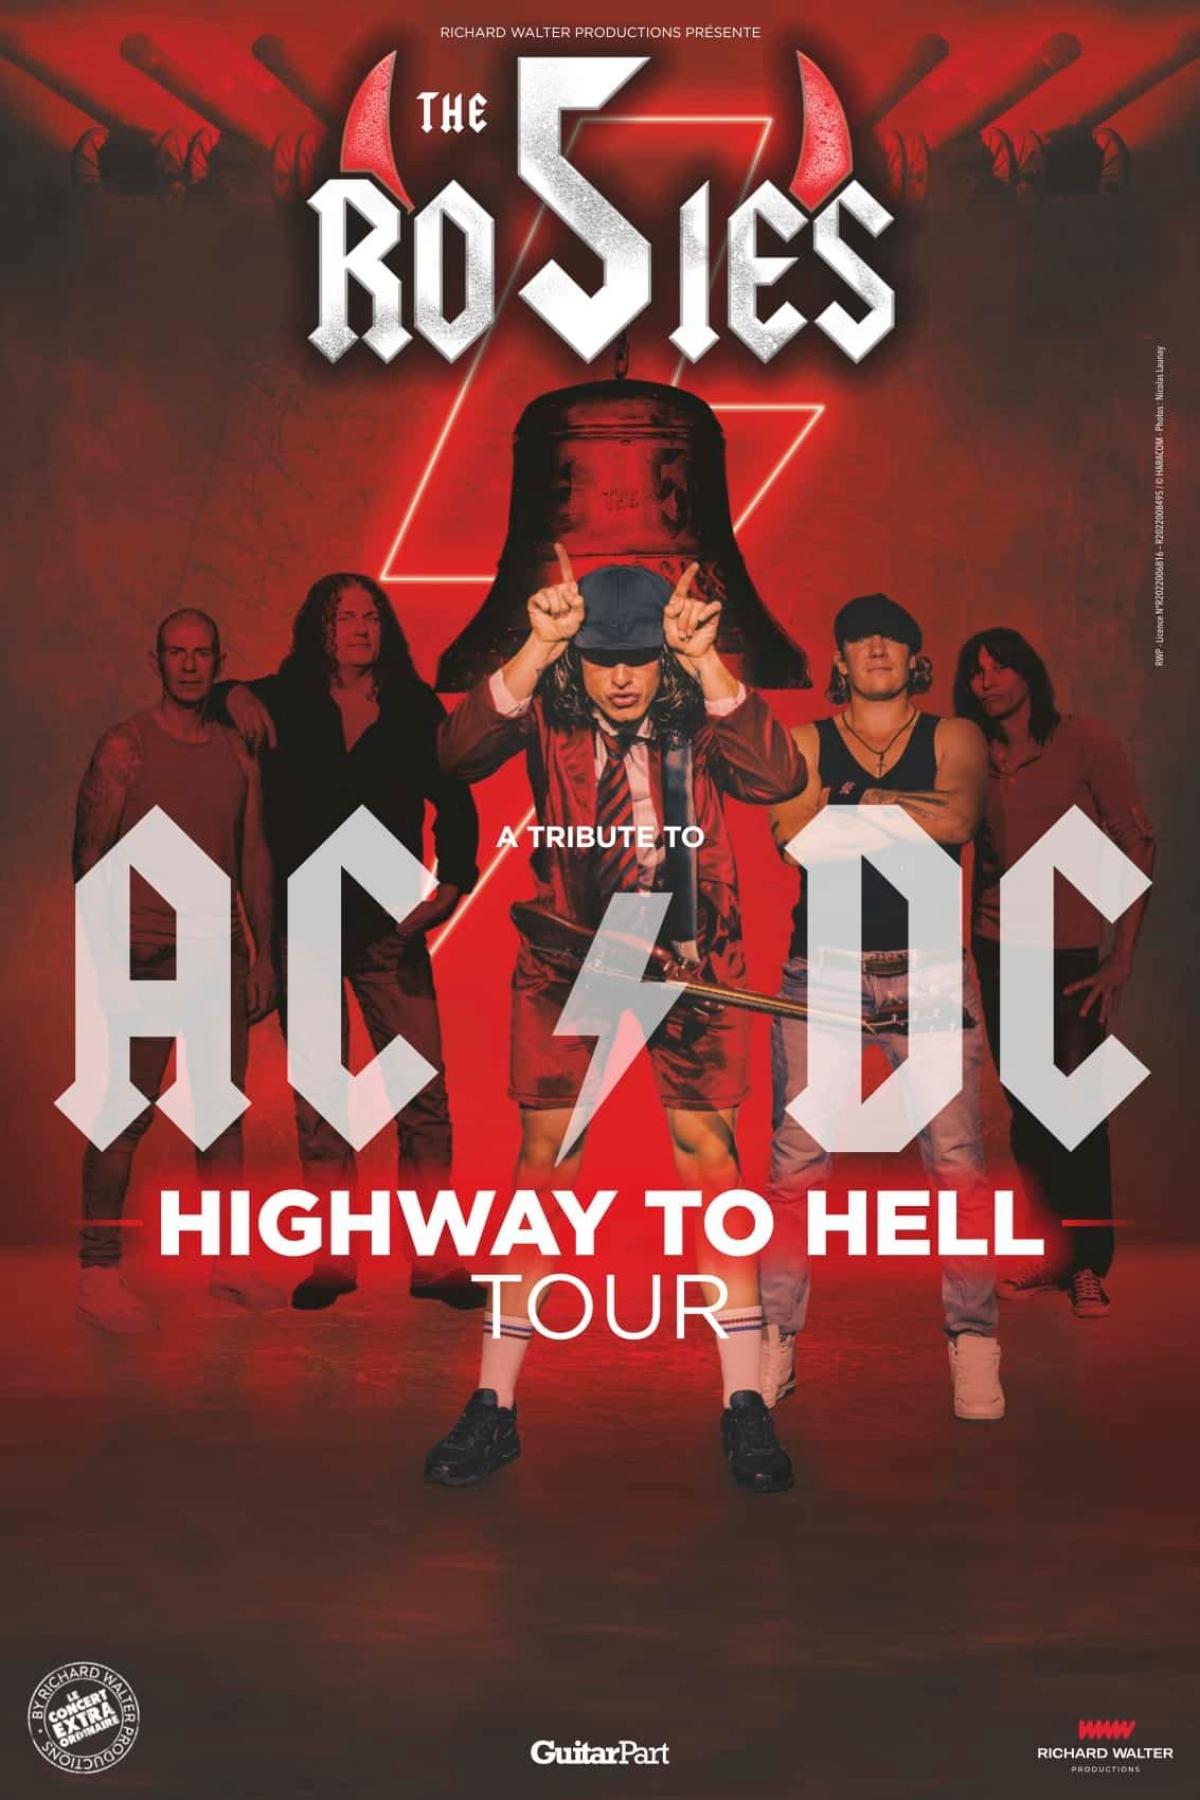 The 5 Rosies - Highway To Hell Tour at La Rayonne Tickets